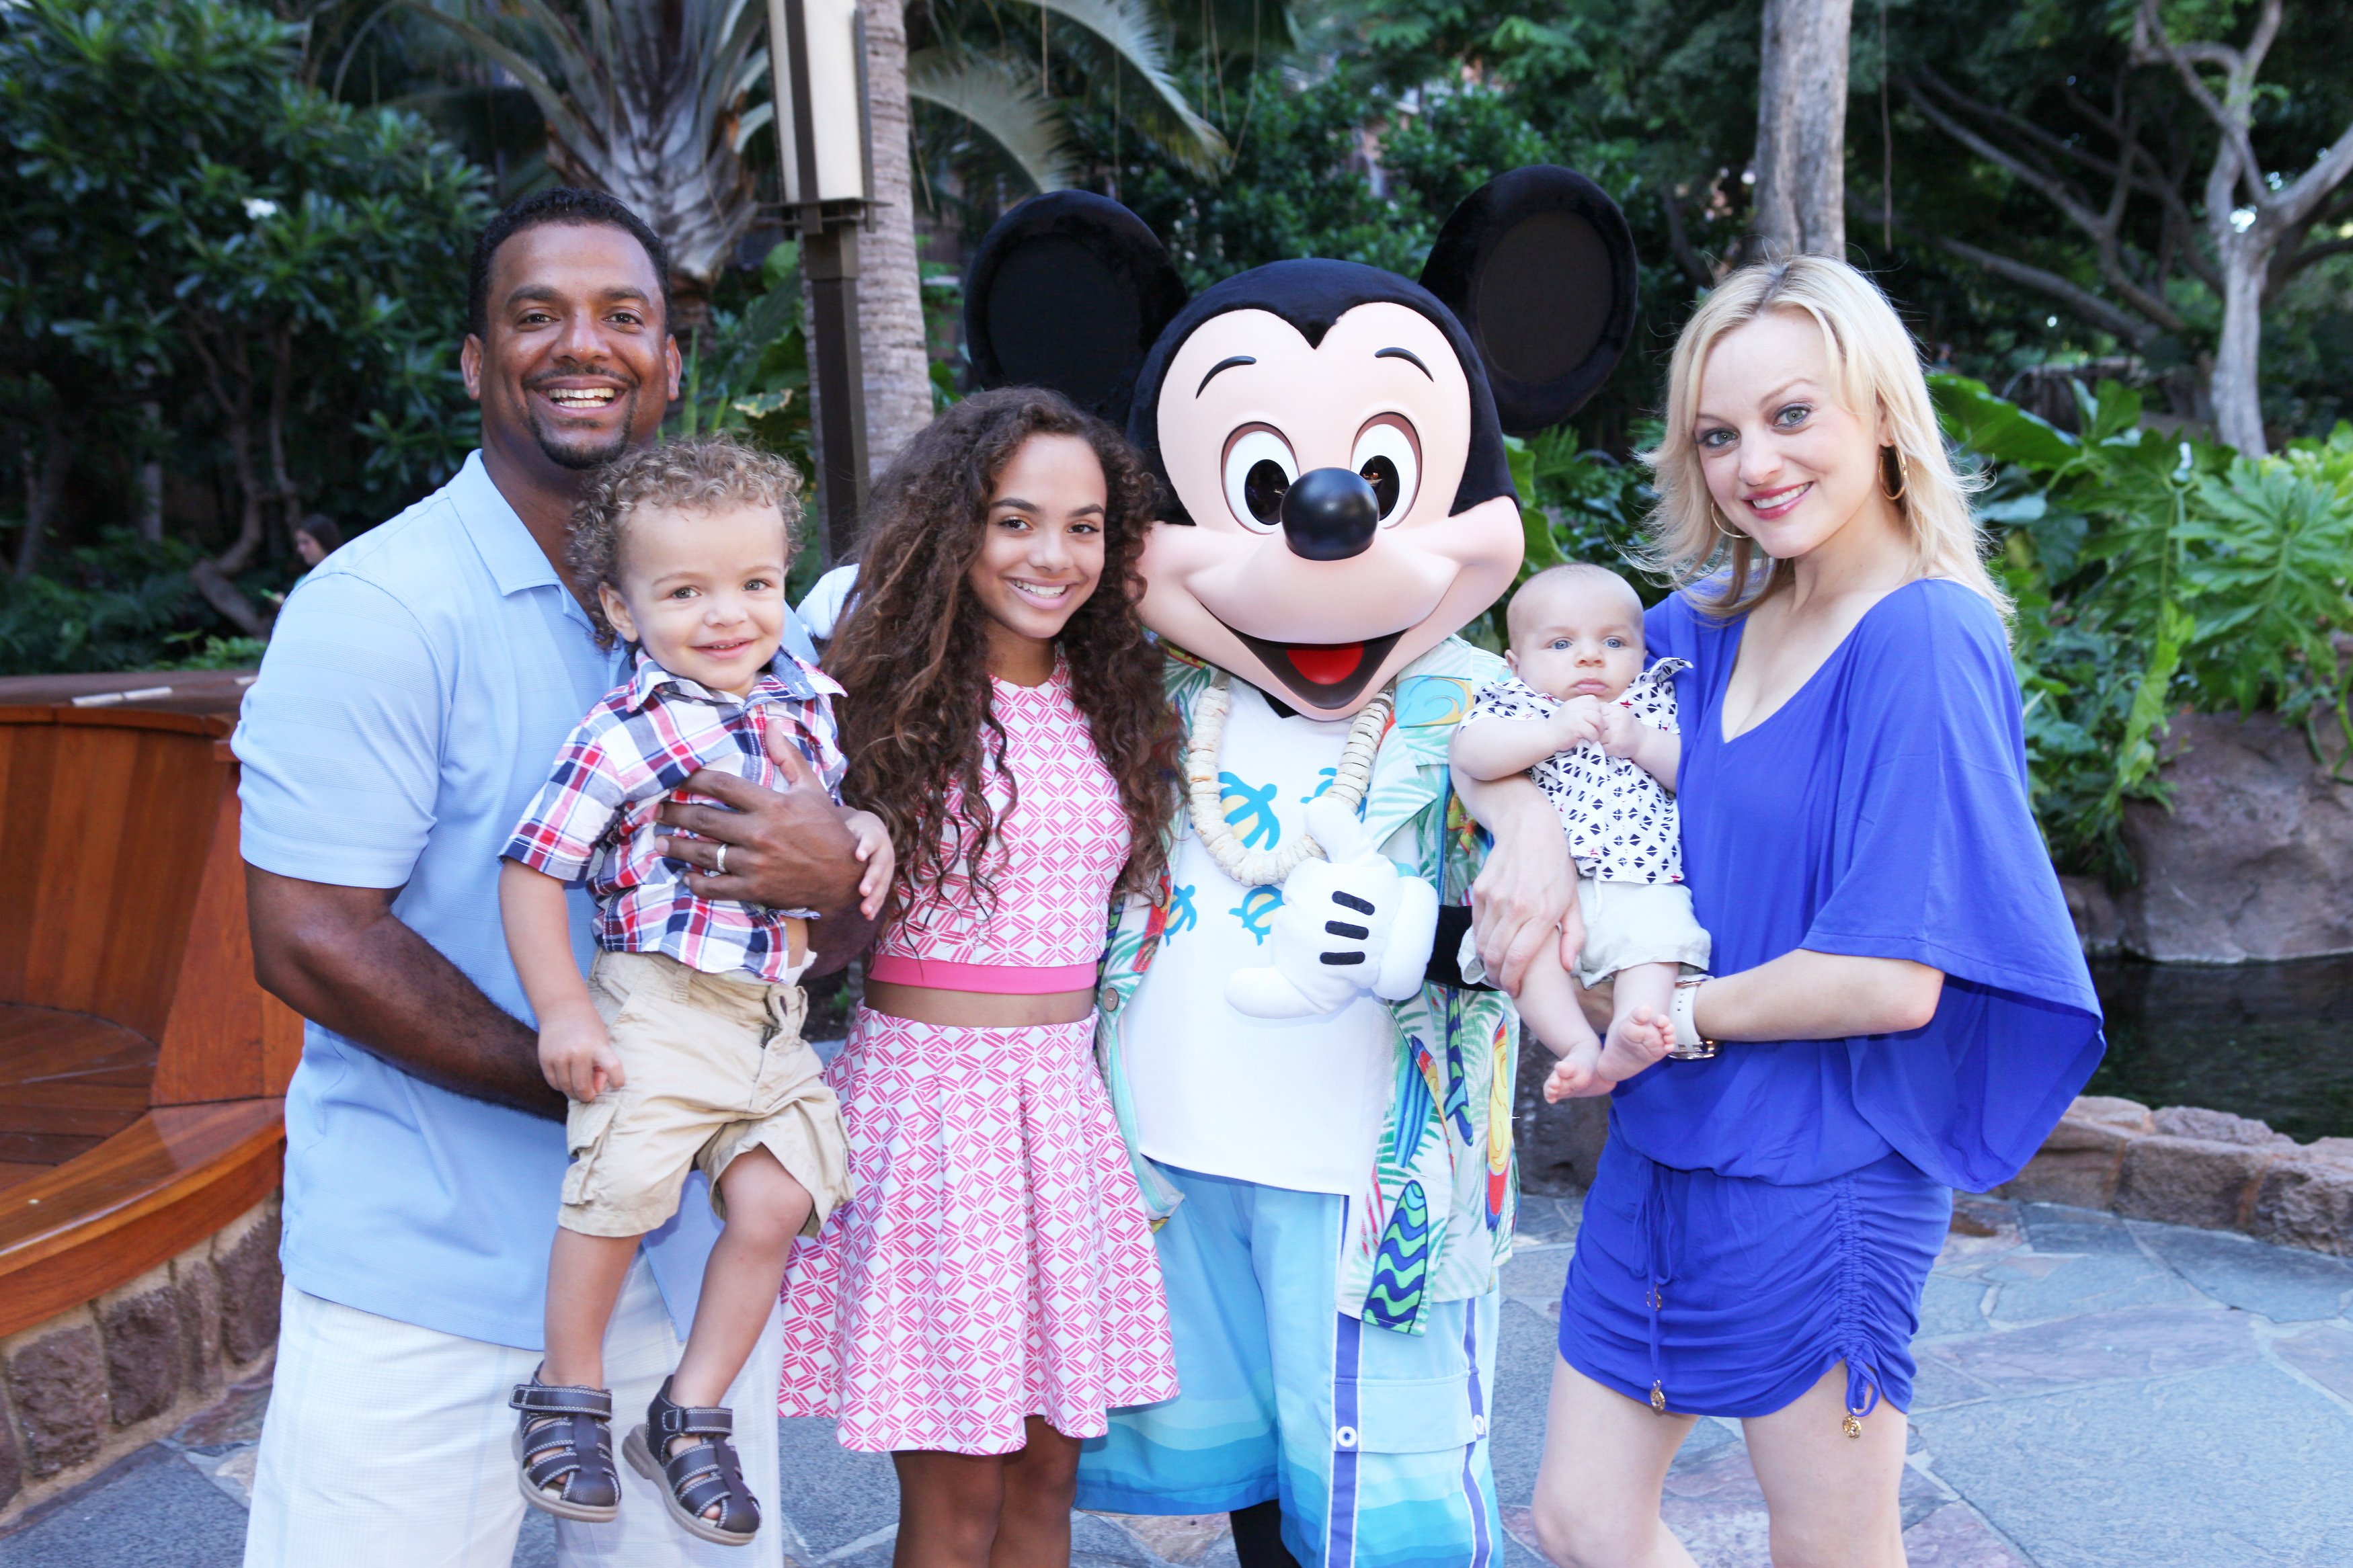 Alfonso Ribeiro, his wife Angela, and their 3 kids, pose at a Hawaiian Disney Resort & Spa on July 26, 2015. | Source: Getty Images